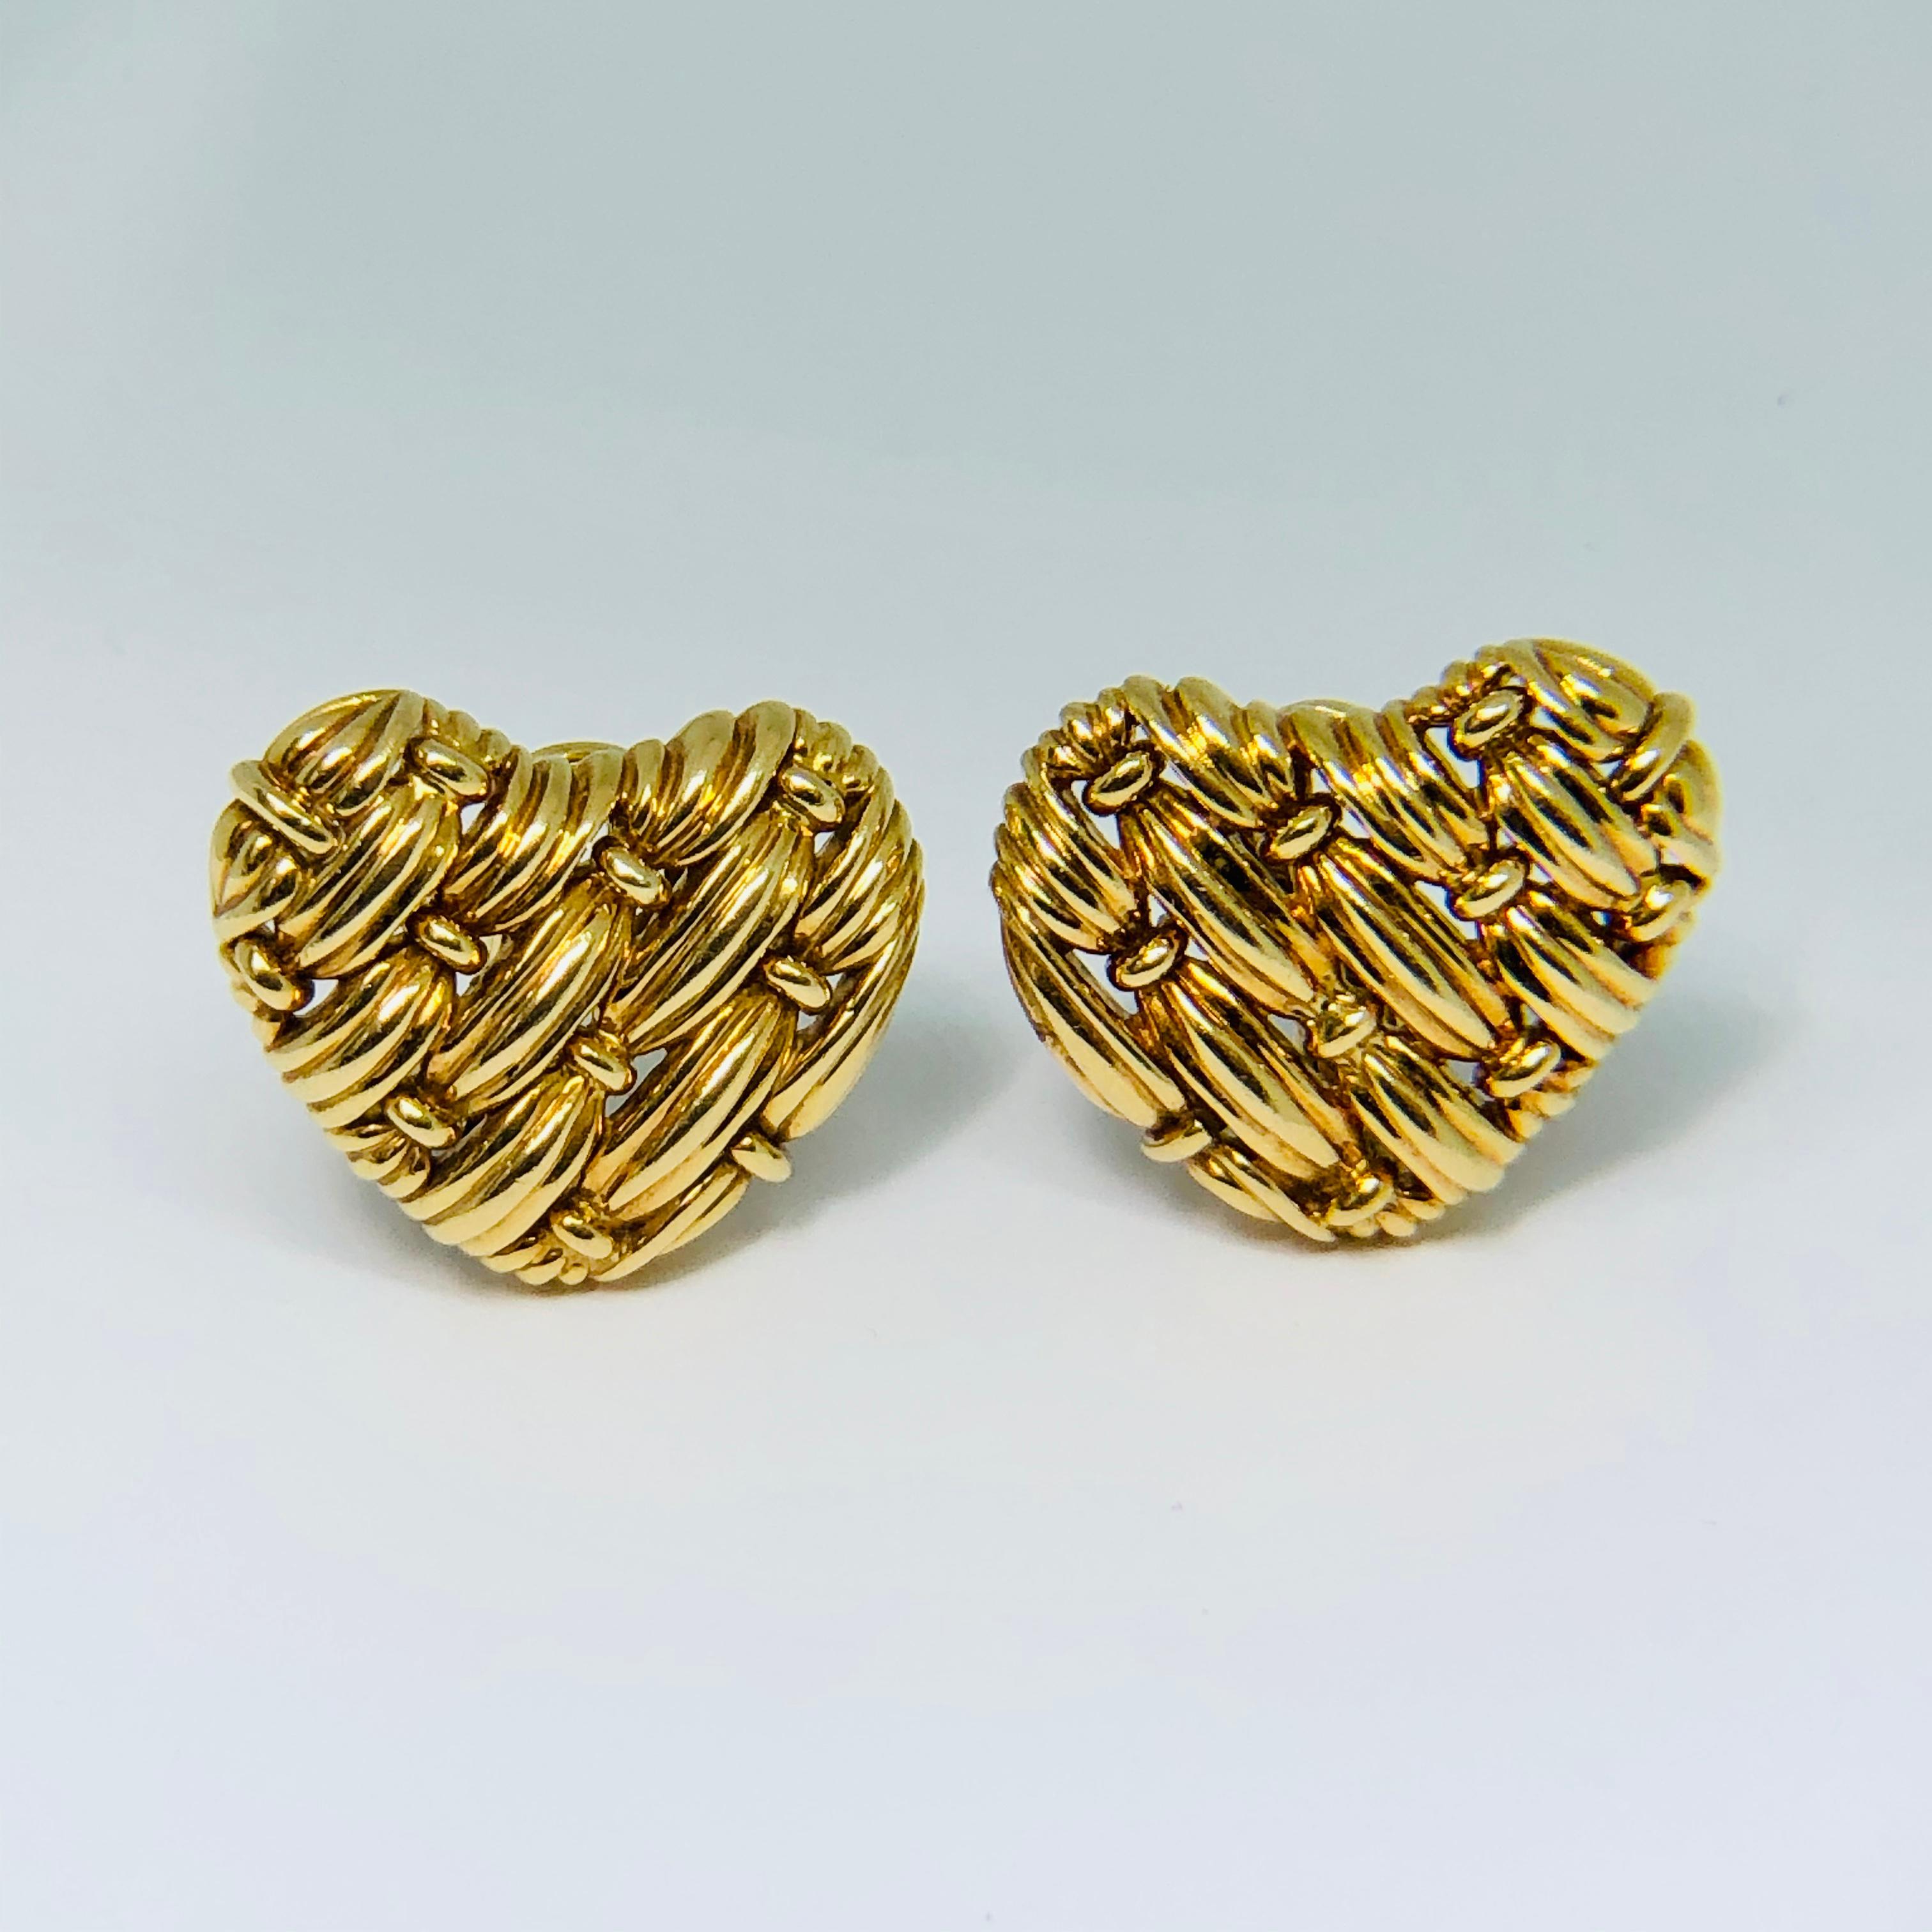 Textured 18ct woven gold heart shaped ear clips made, signed and numbered, part of the 'Signature Series' by TIFFANY & CO. Heavy gauge 18K yellow gold with a brilliant metallic foil weave finish. Clip backs, with attached comfort cushions.
About